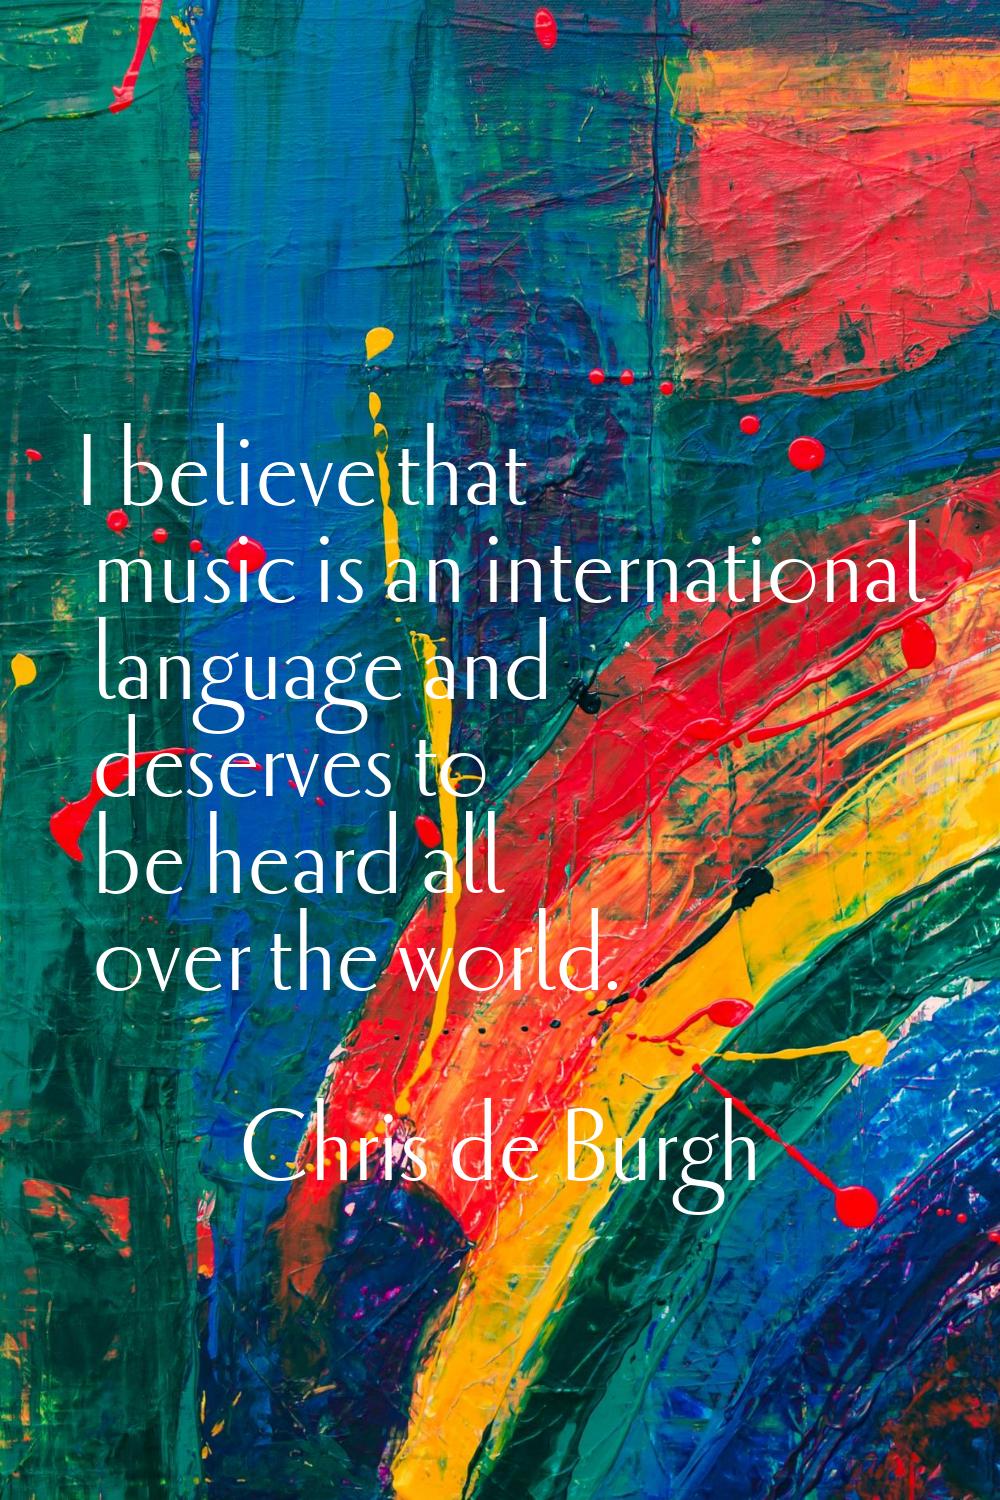 I believe that music is an international language and deserves to be heard all over the world.